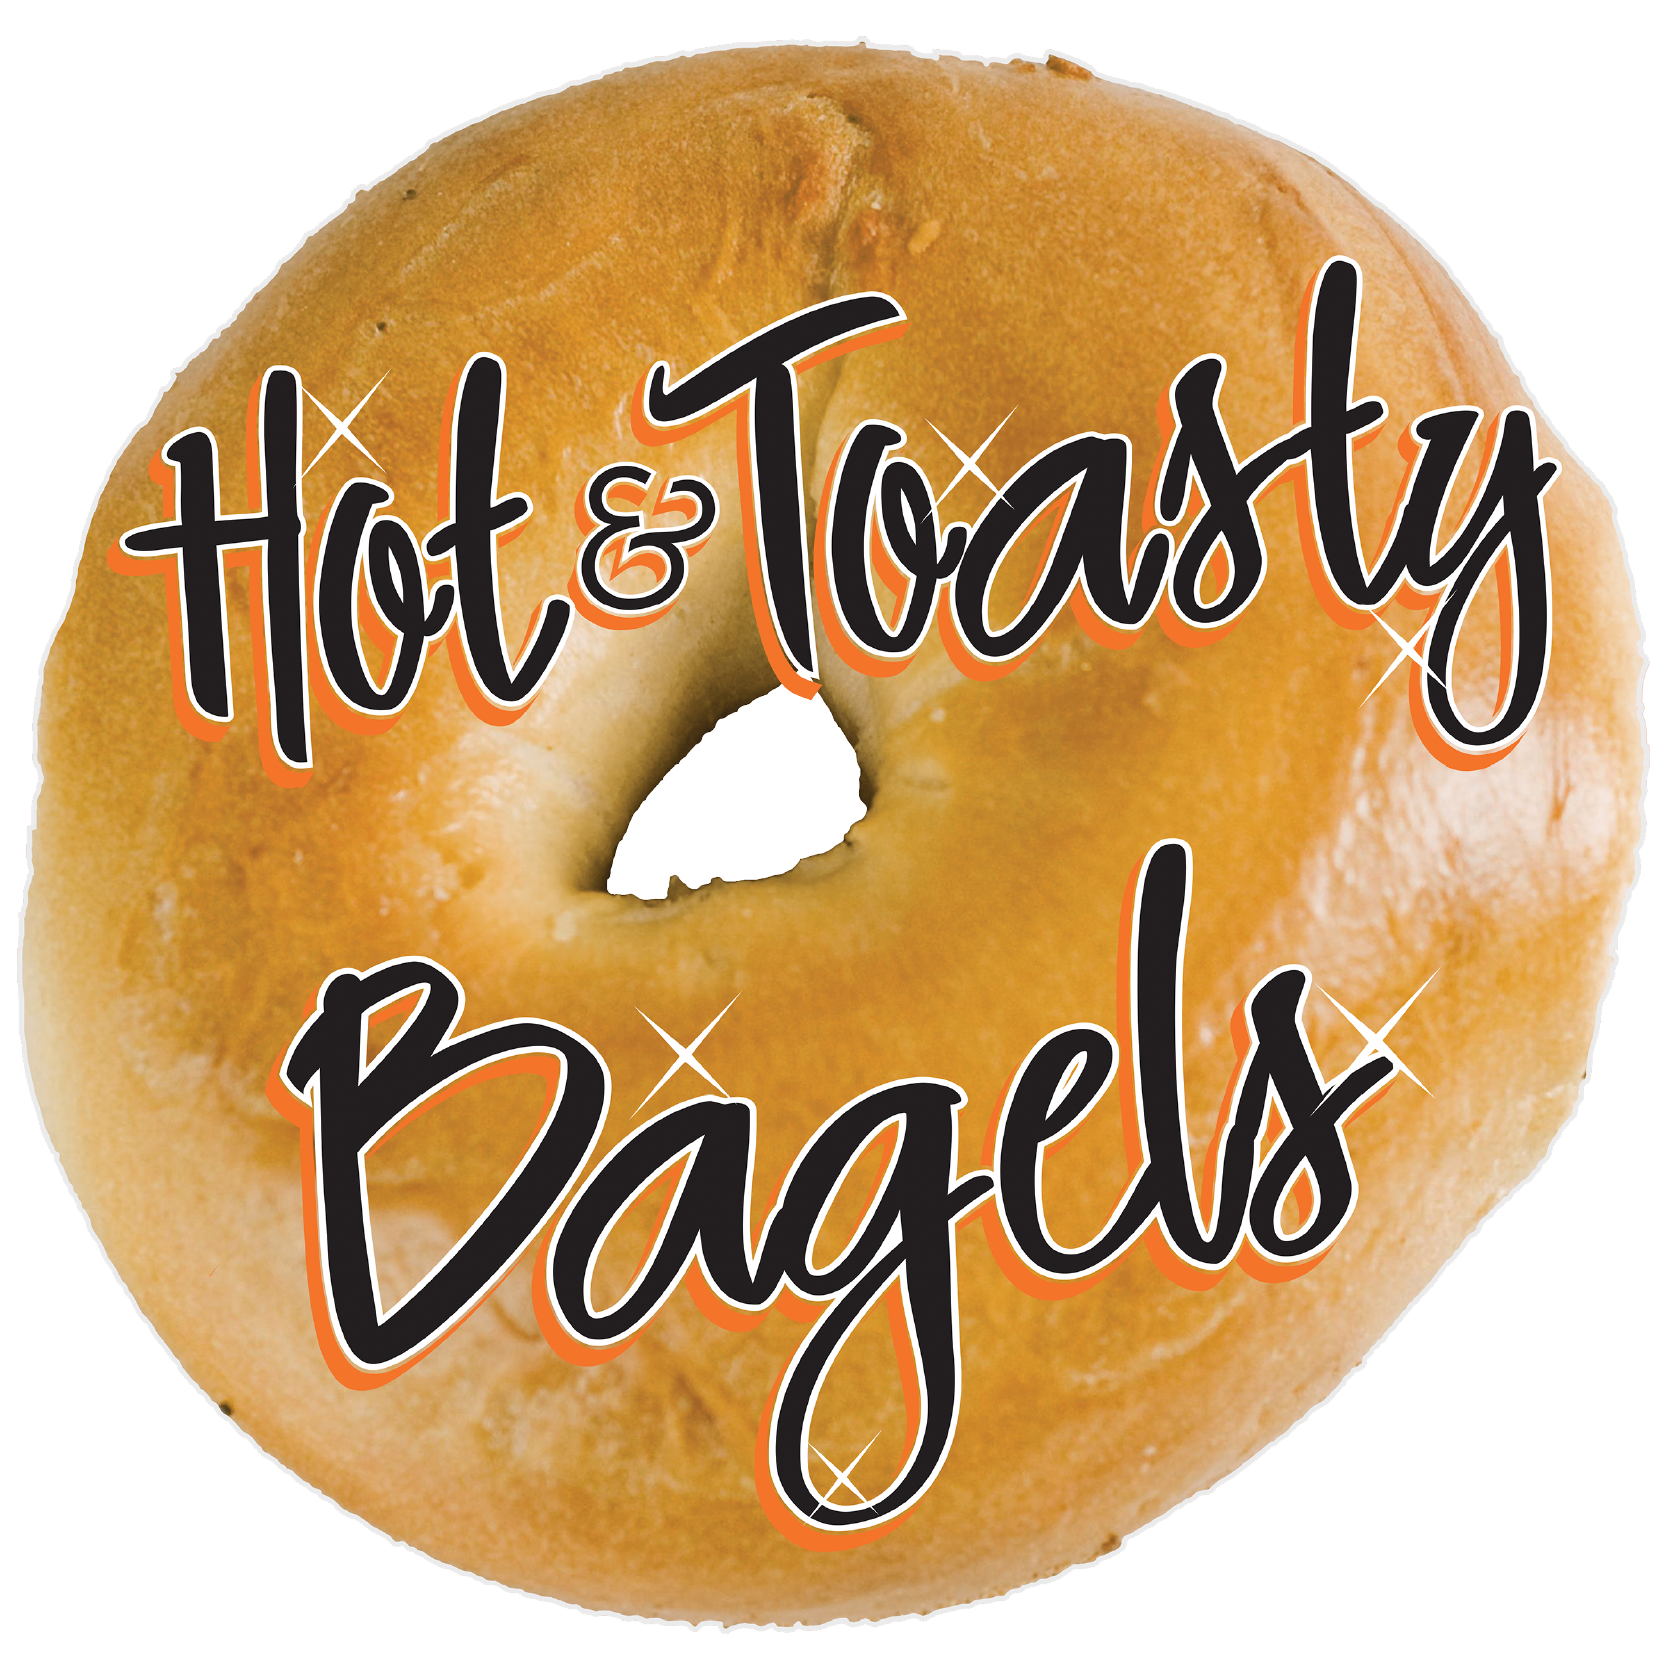 Hot & Toasty Bagels Home